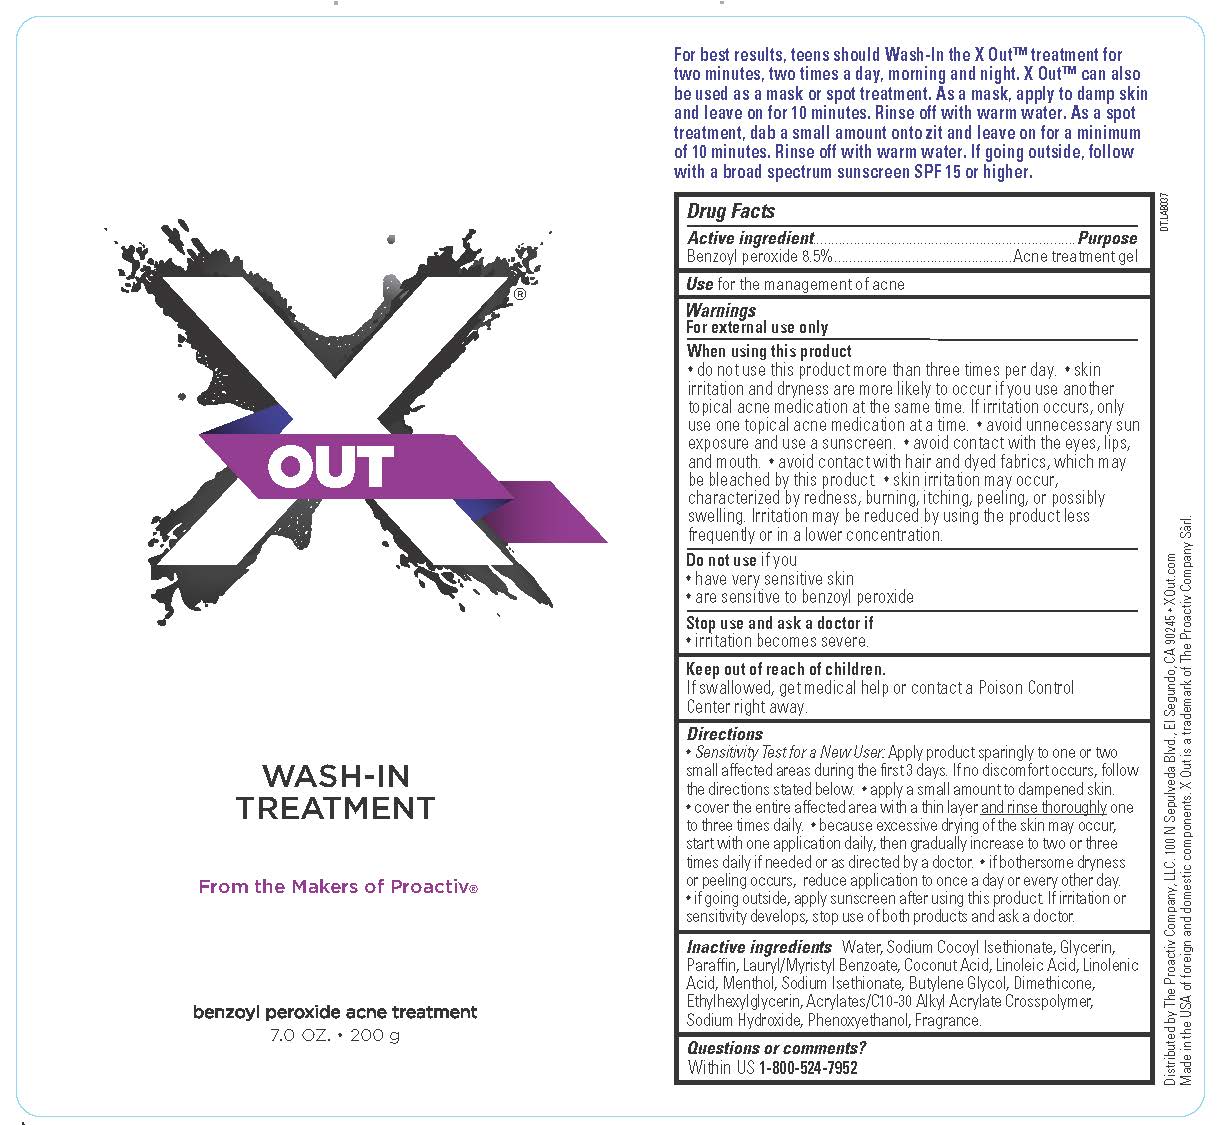 DT.LAB037_X Out Wash-In Treatment 7oz_120716.jpg